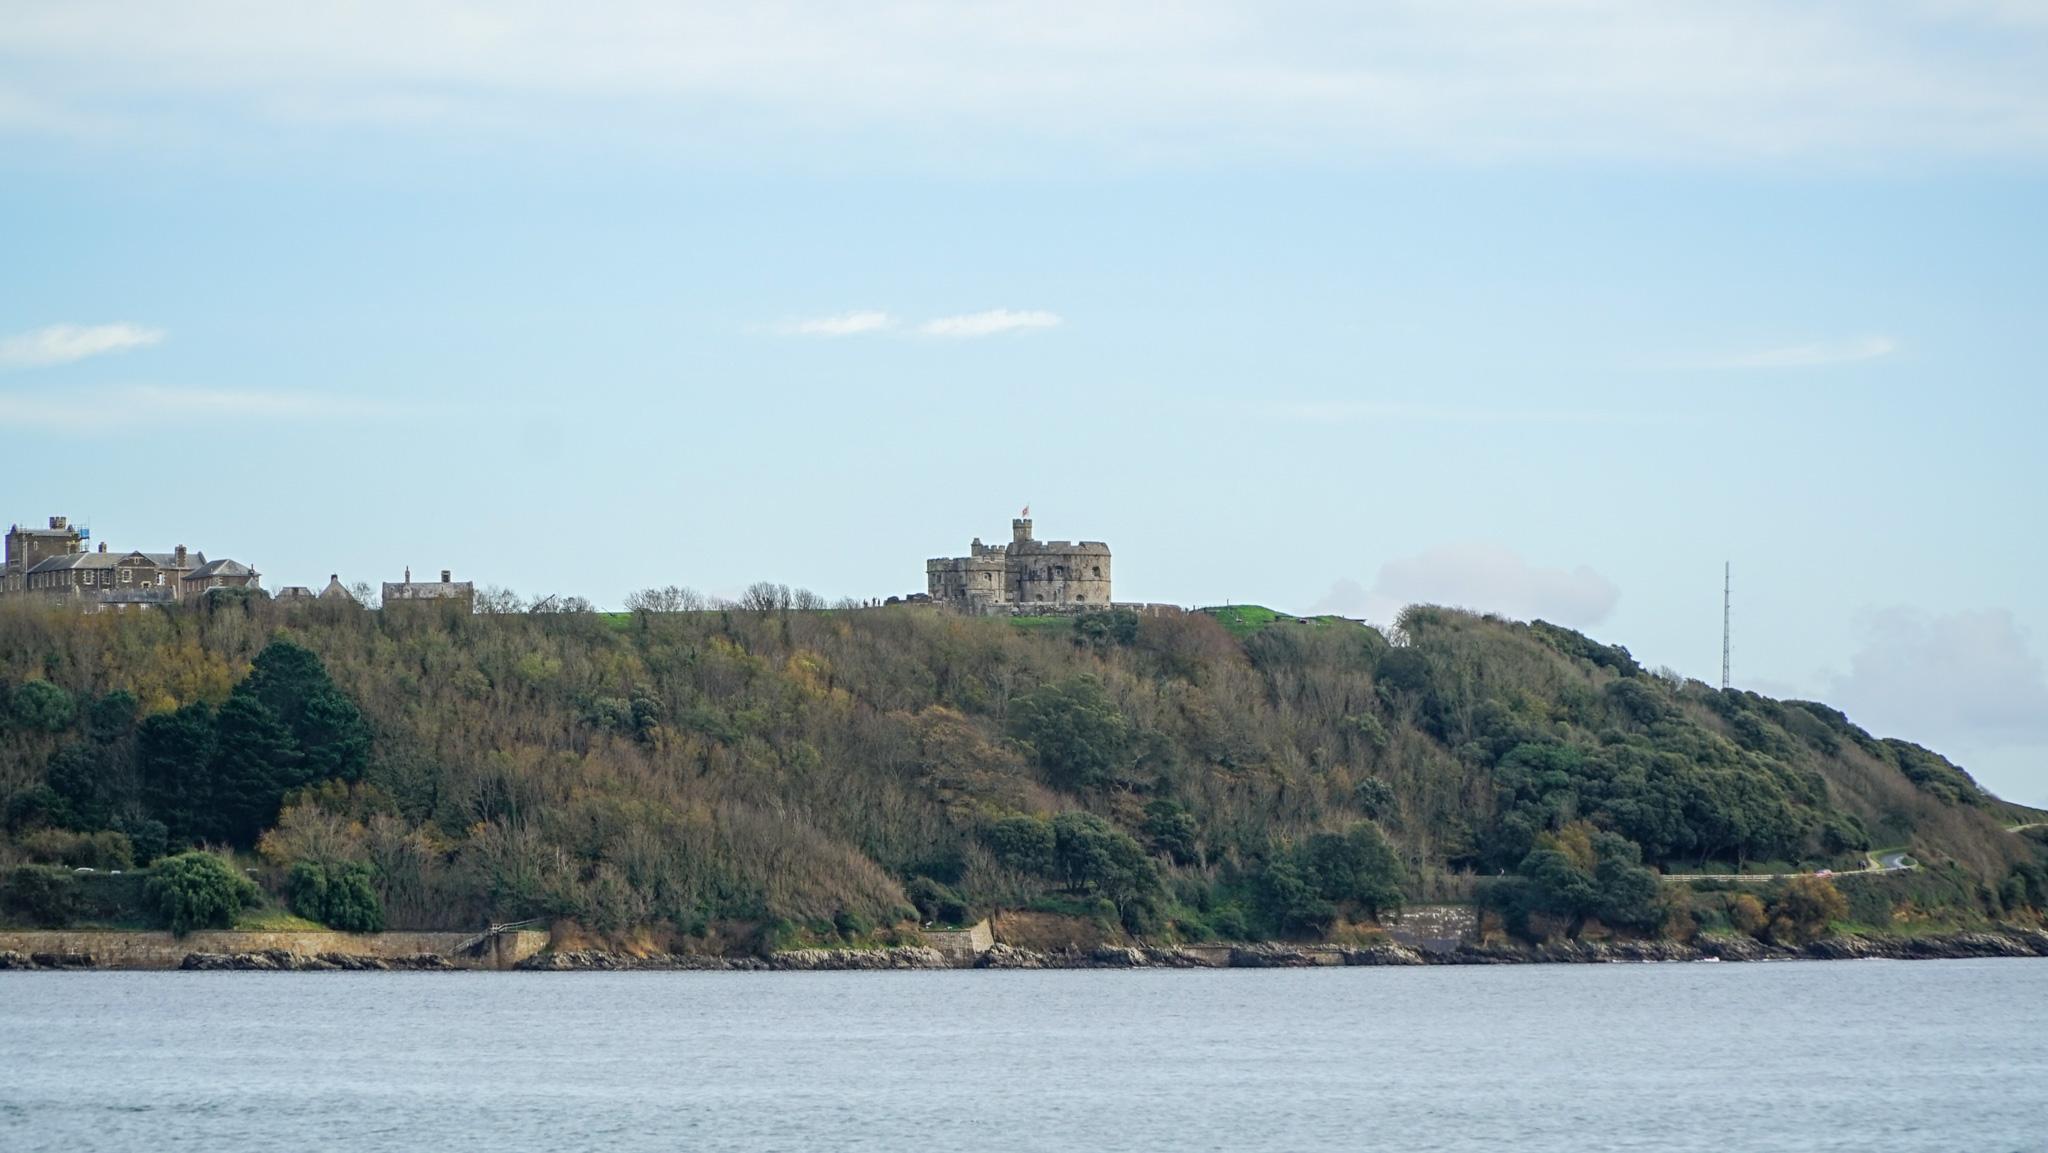 Pendennis castle from a distance in Falmouth